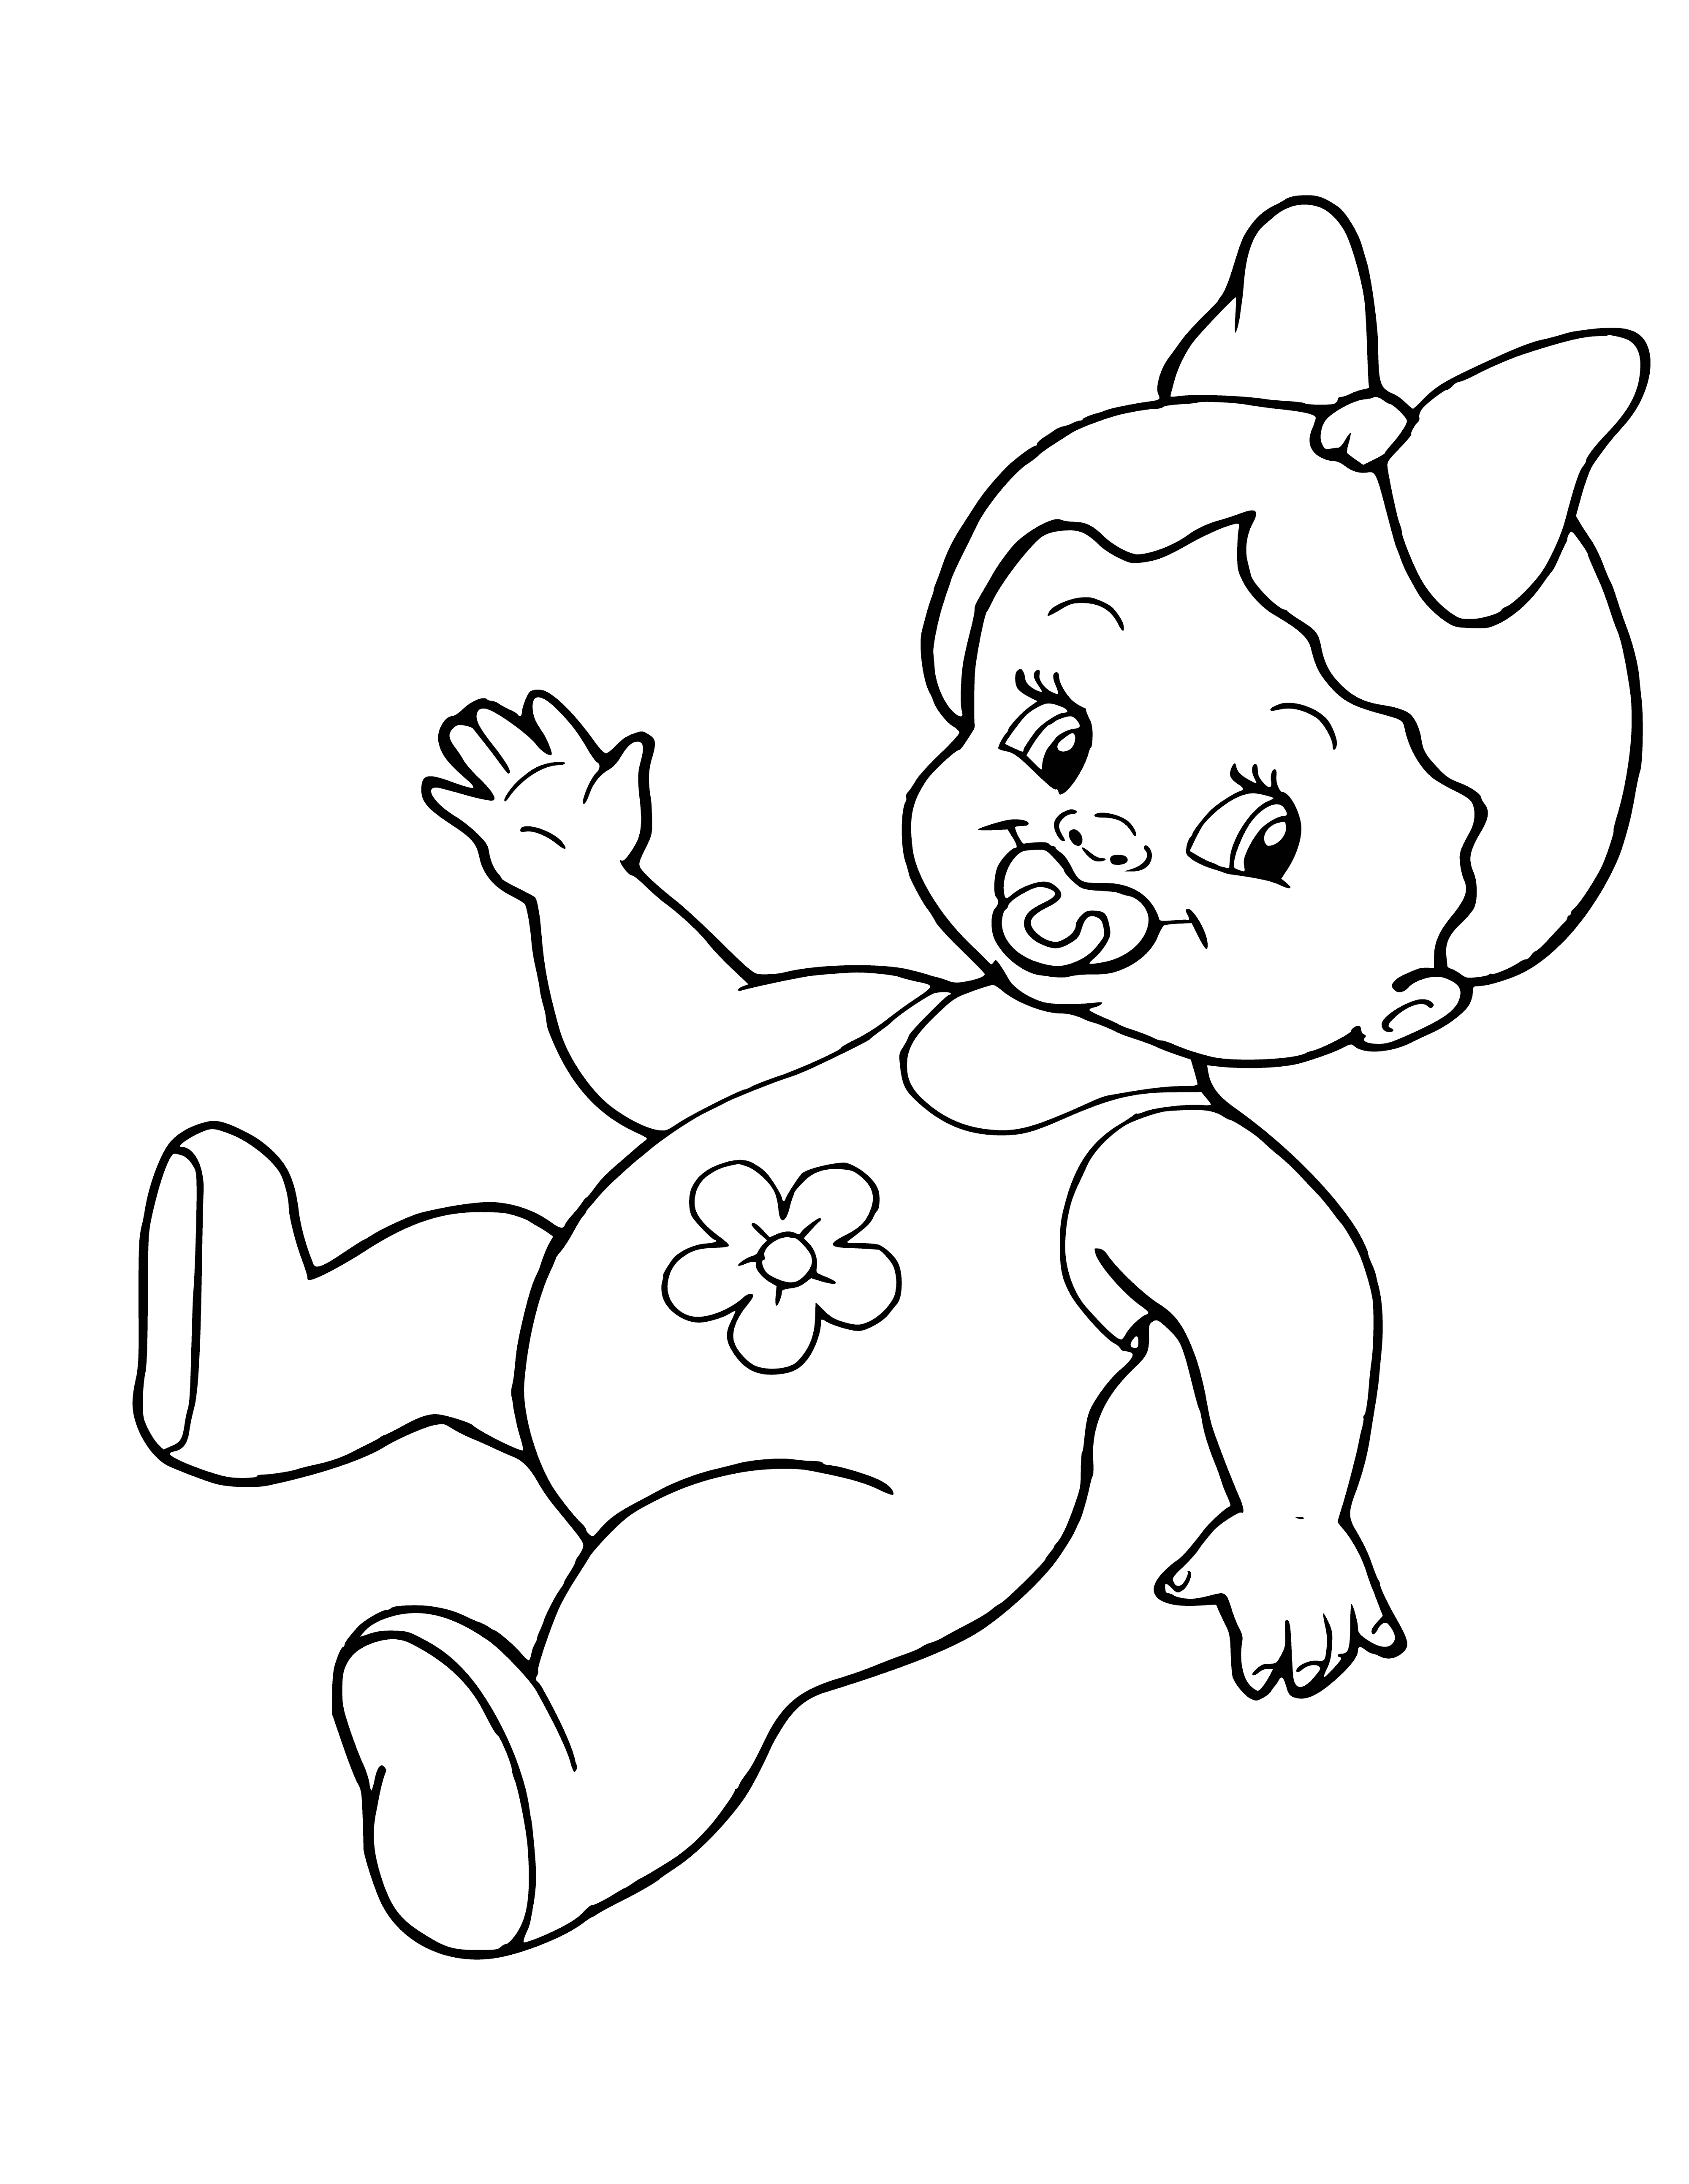 coloring page: Wooden toy doll with detachable head and white/black painted body; has polka dots, string arms & legs, and black button eyes.